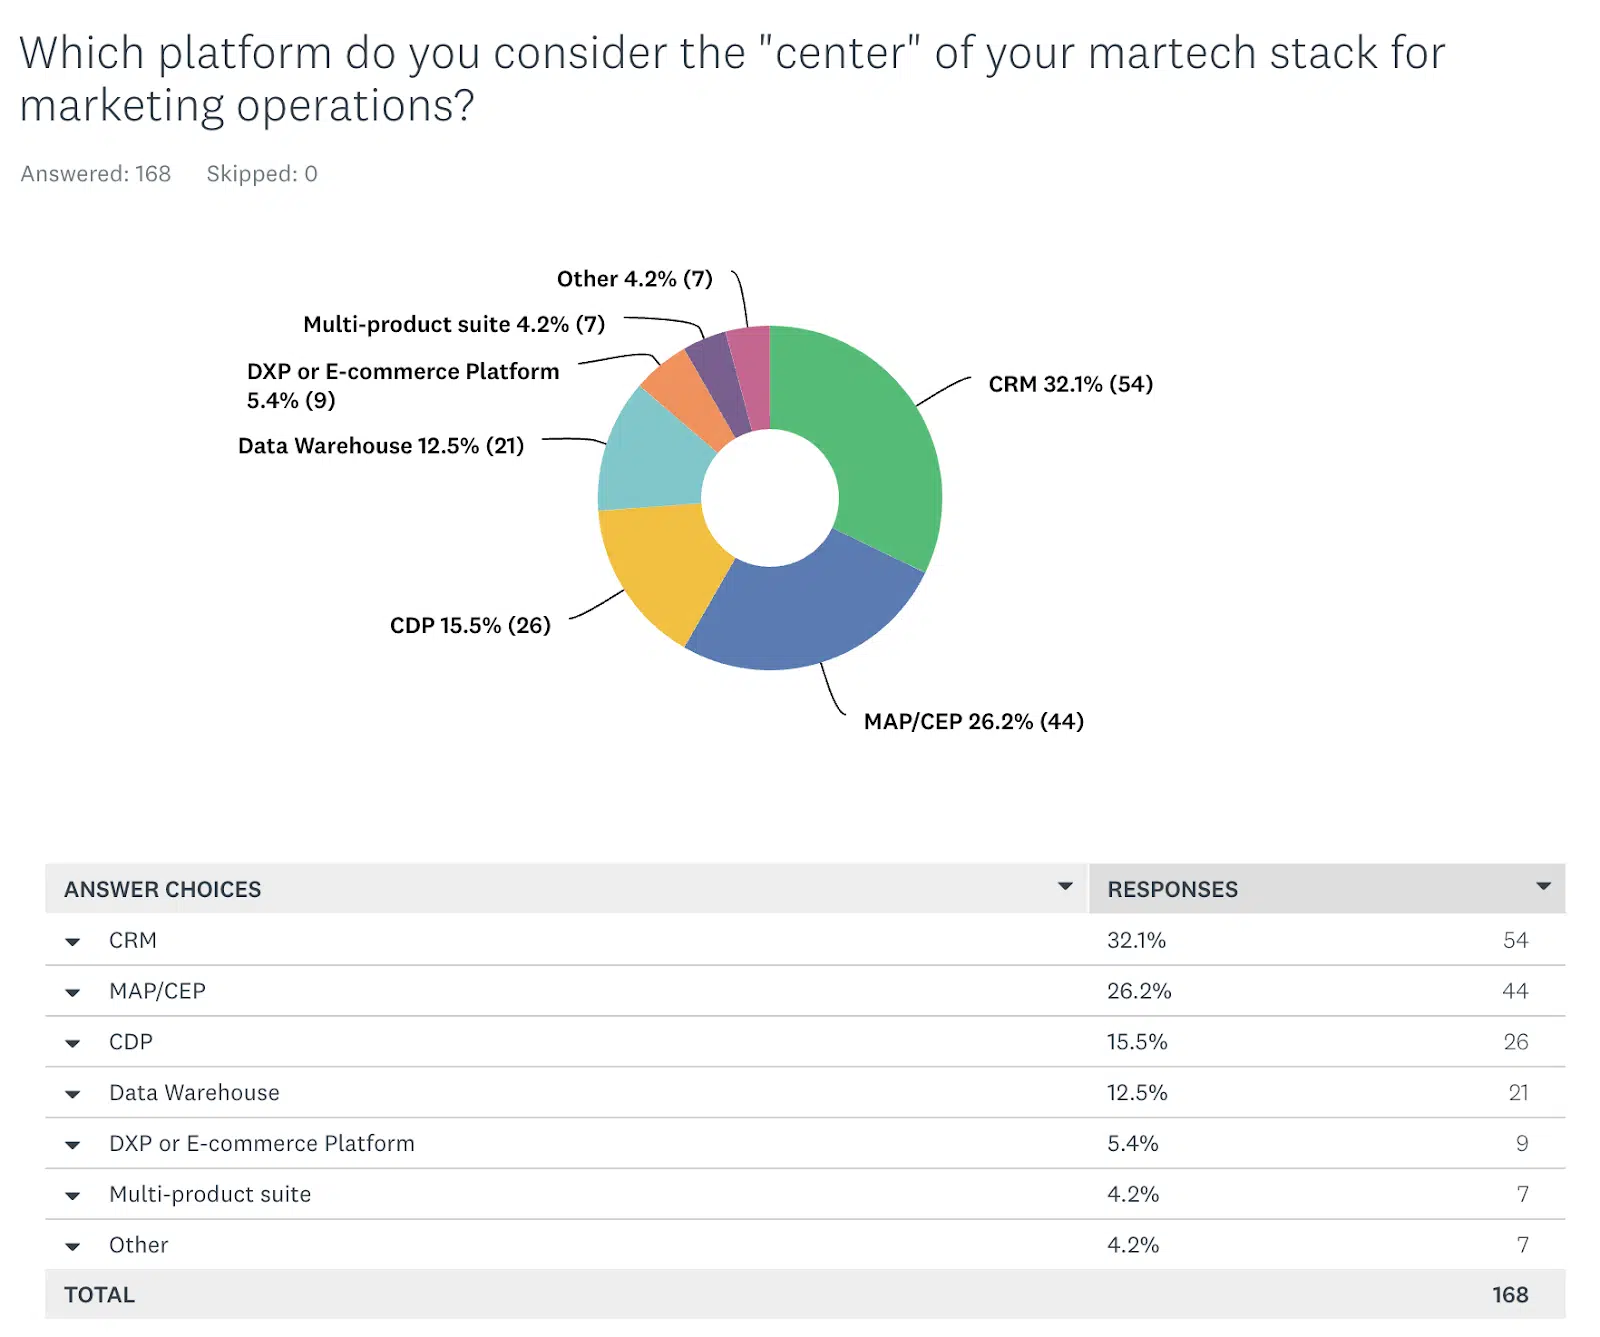 Center of the martech stack